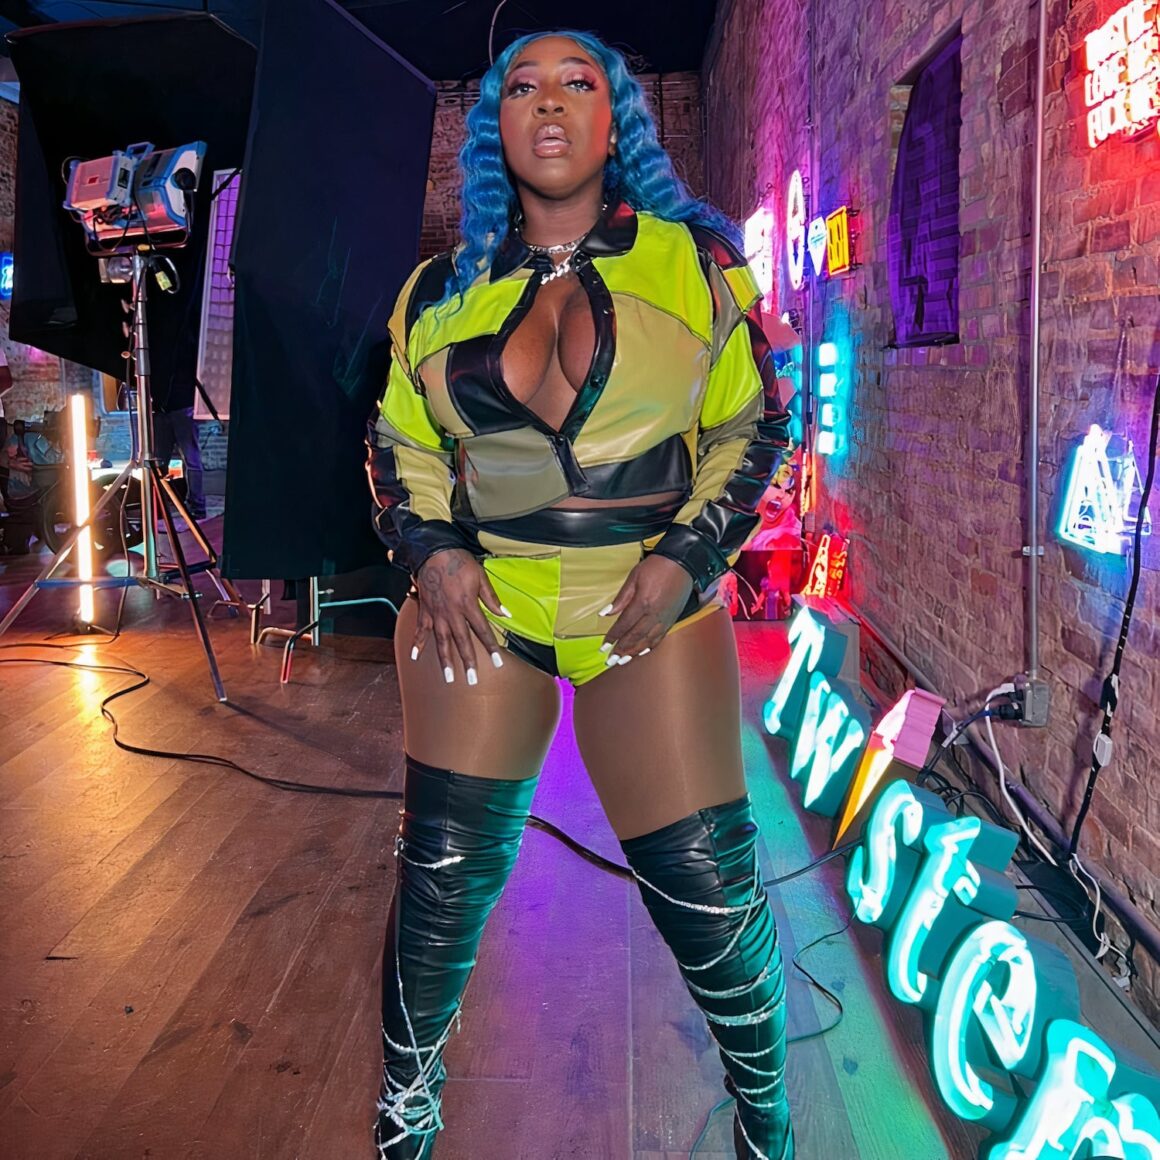 Spice Confirmed For Reggae Sumfest 2022 Lineup